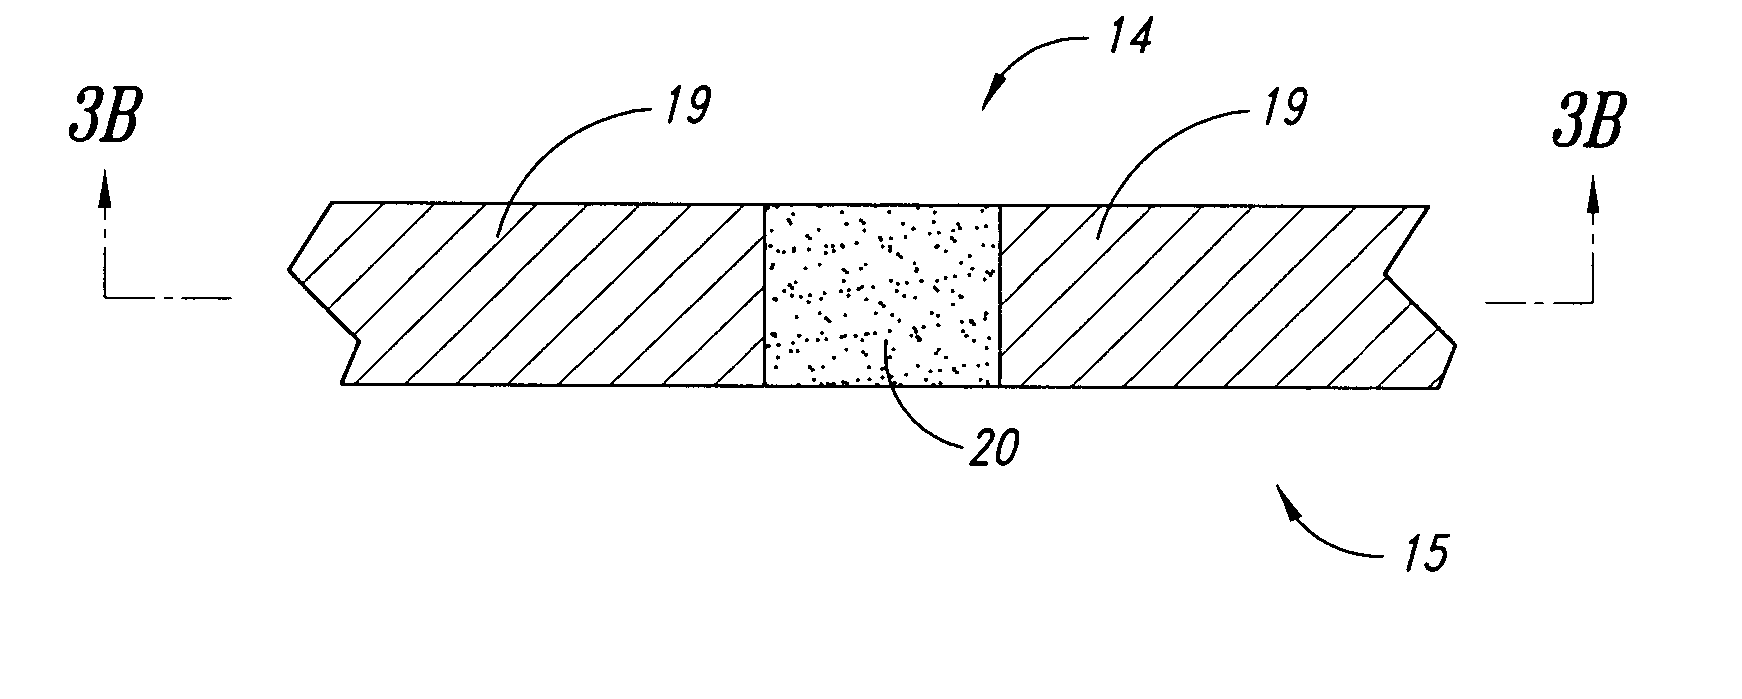 Printable electric circuits, electronic components and method of forming the same